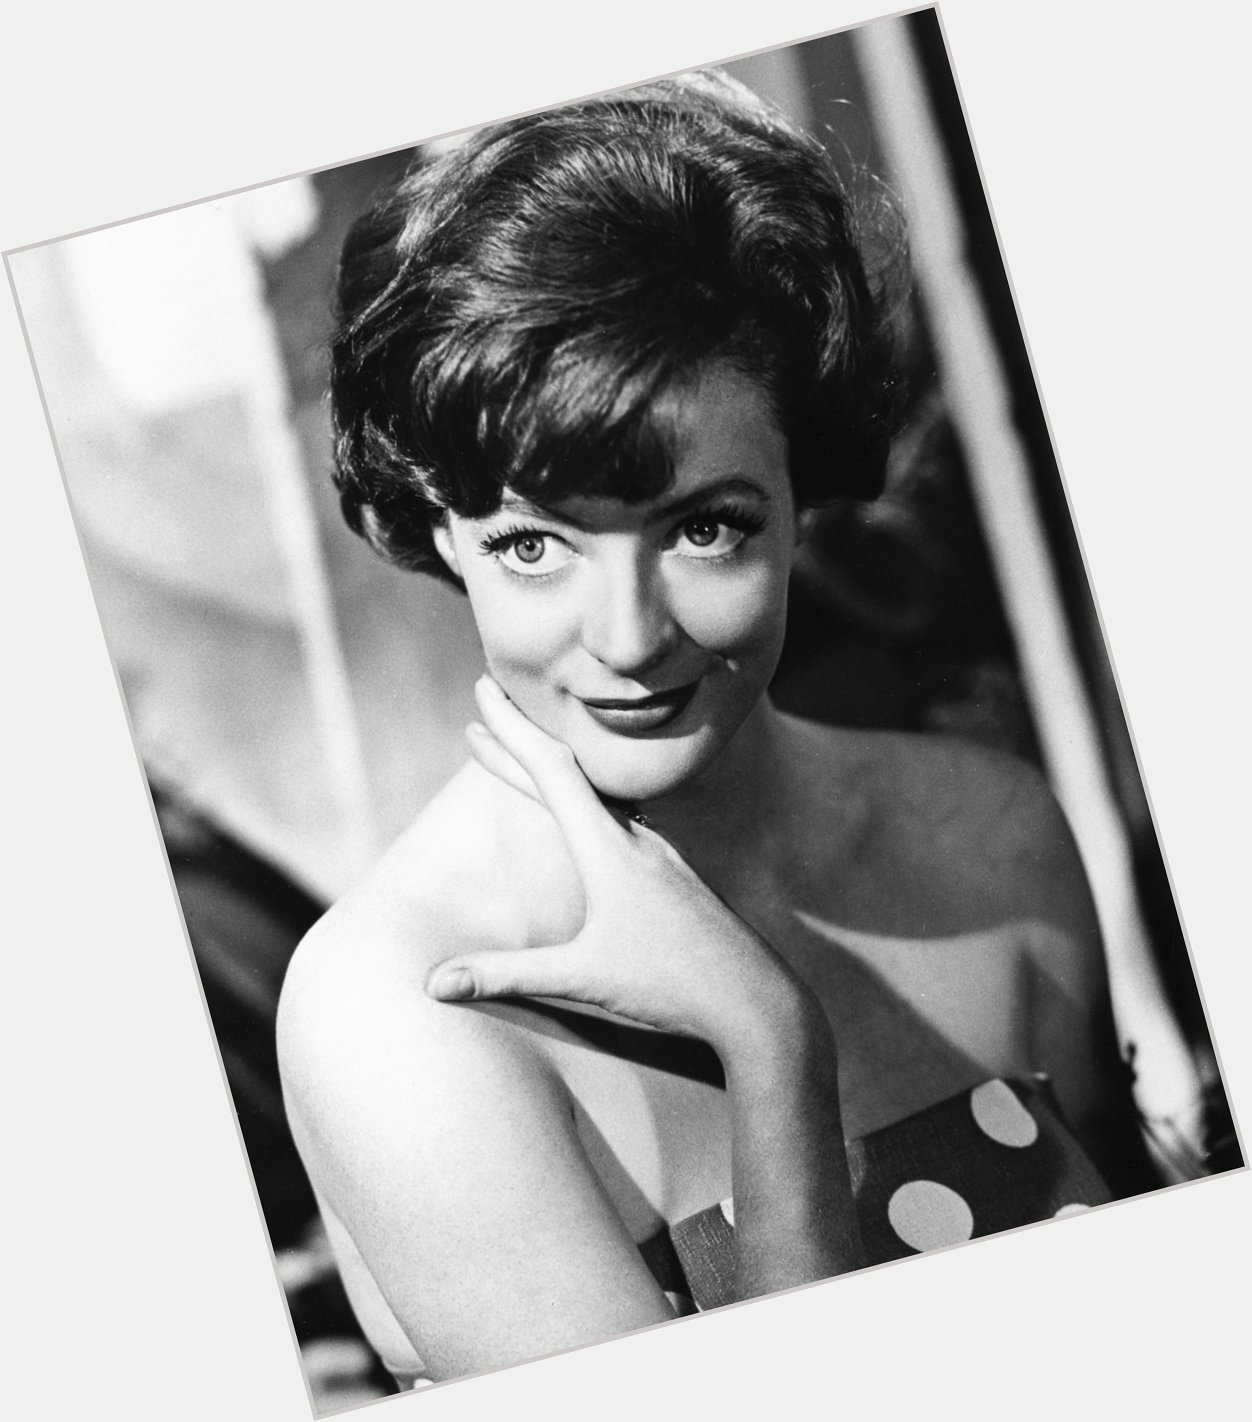 Happy 81st birthday, Dame Maggie Smith! She played McGonagall in the films. Stay sassy! 